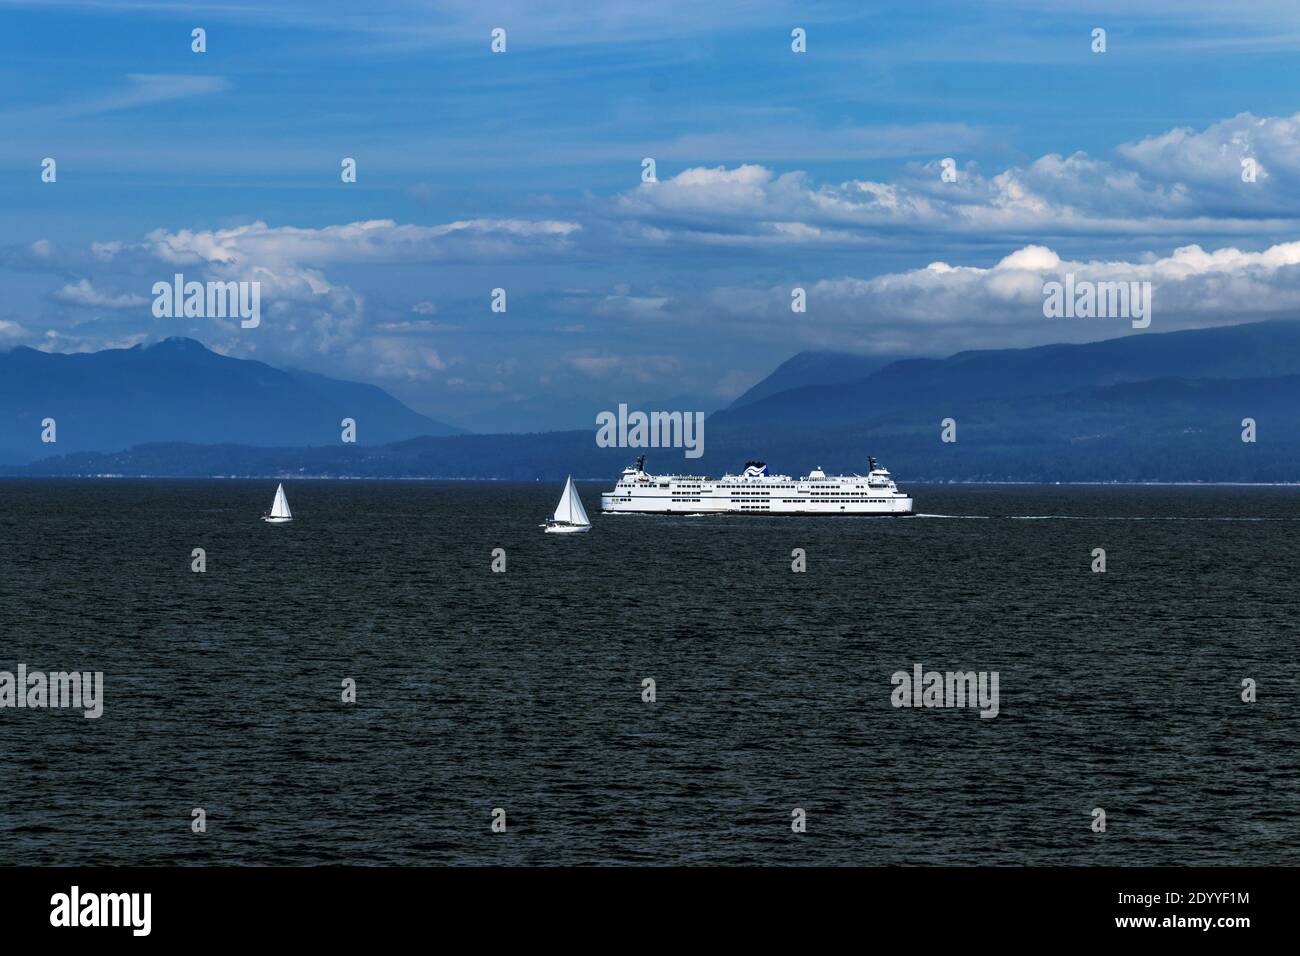 Sail boats and the giant ferry on the Pacific Ocean, BC, Canada. Pacific ocean borders Western Canada. British Columbia's coastal weather is shaped by Stock Photo